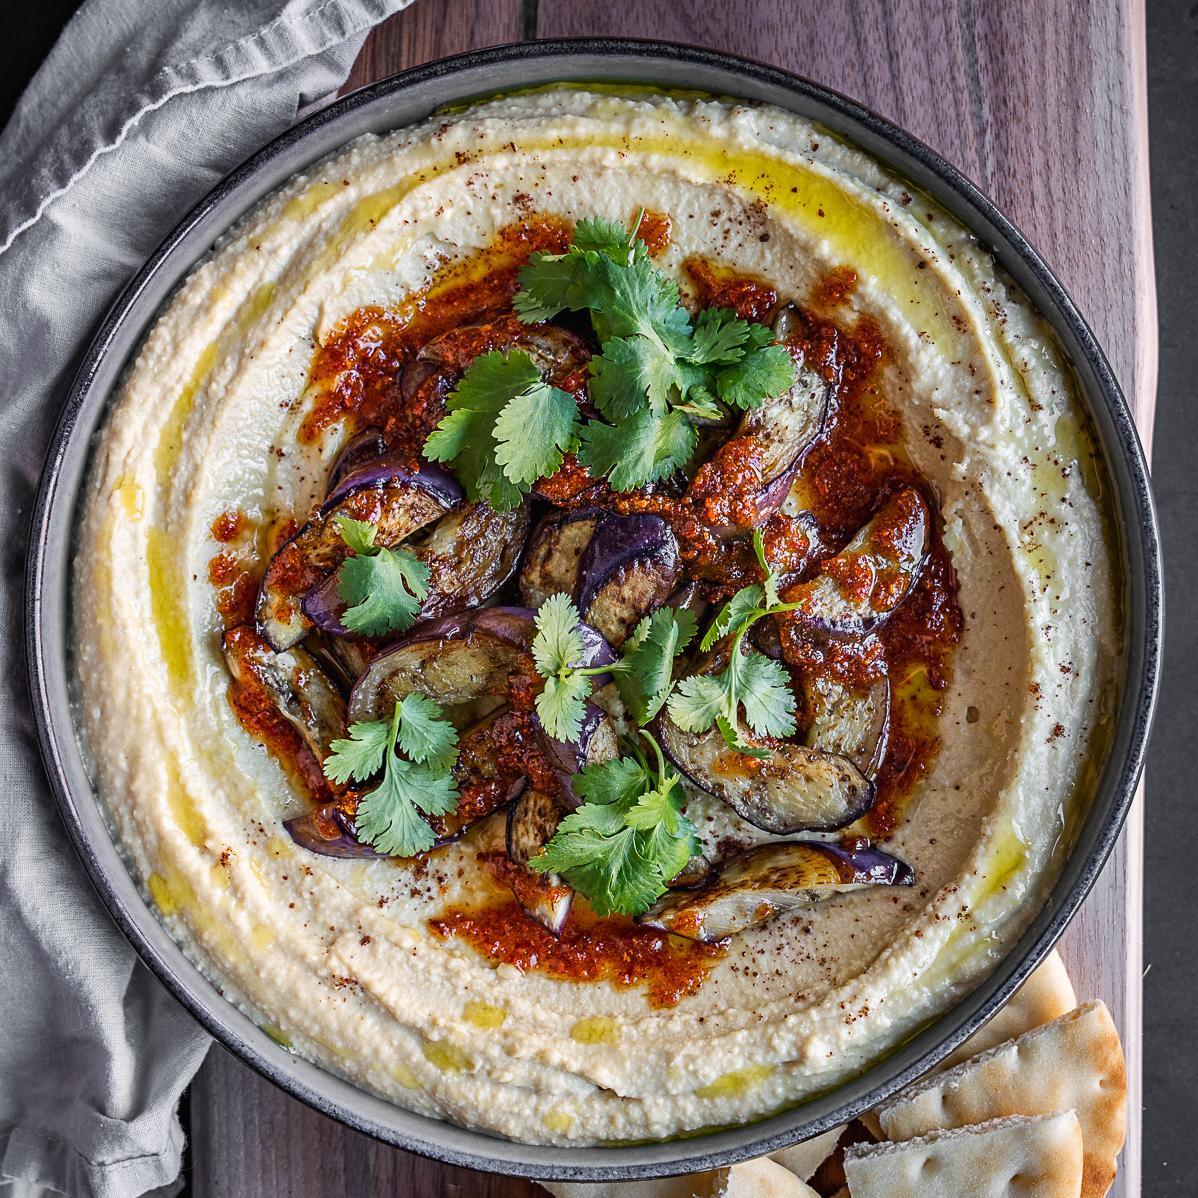  Impress your guests with this unique take on traditional hummus.